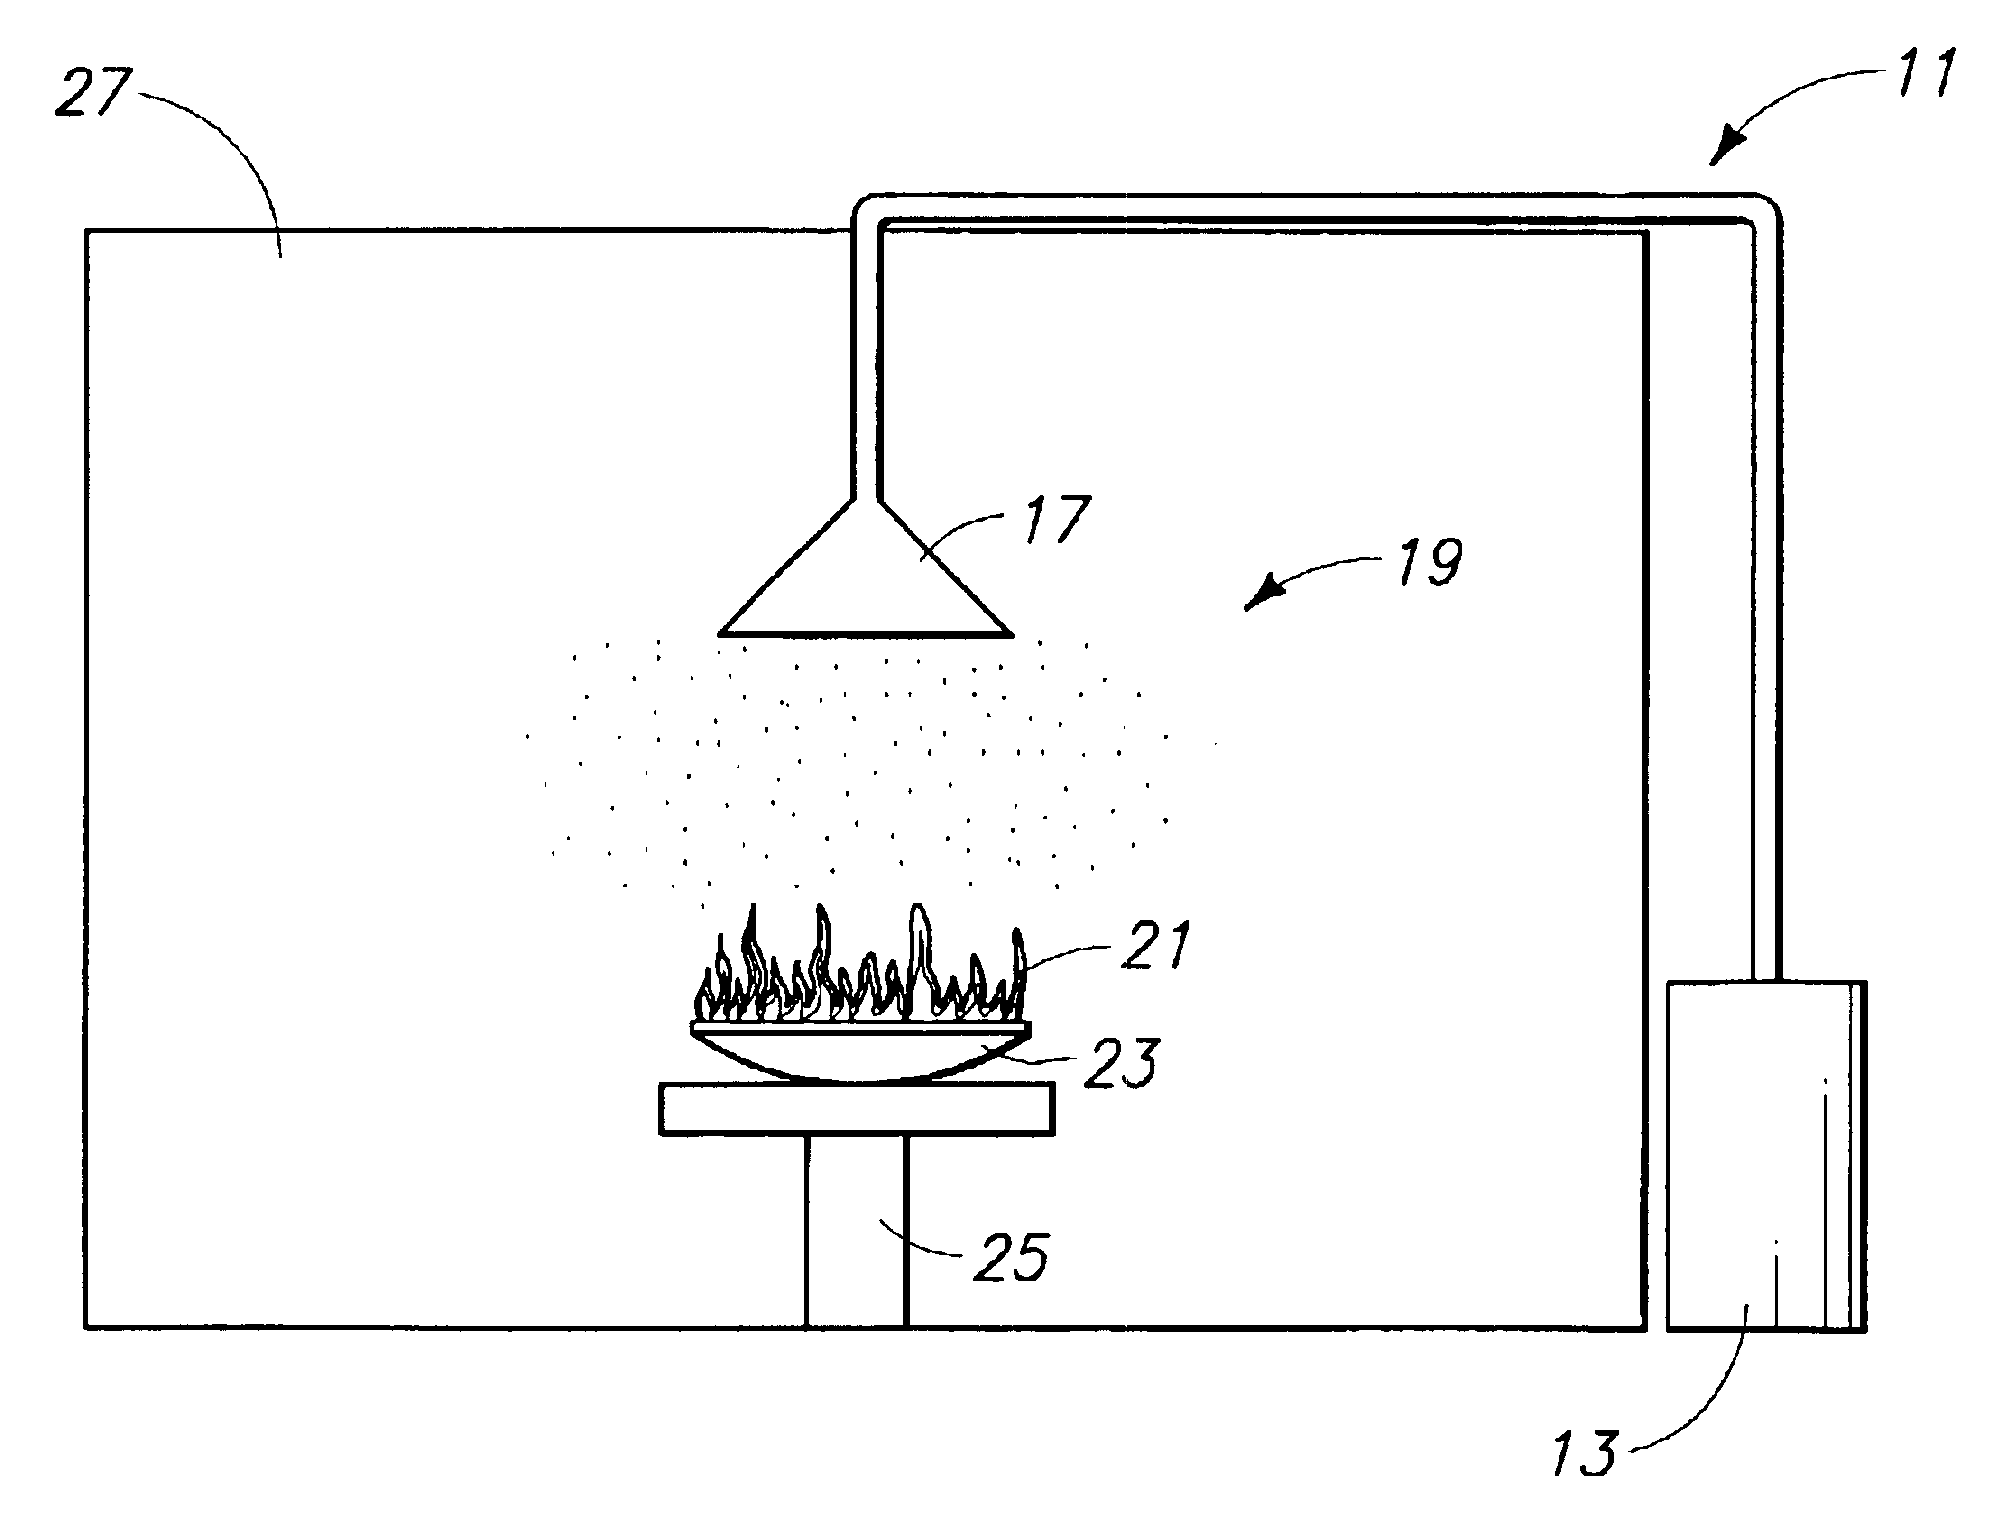 Methods for preparing ethers, ether compositions, fluoroether fire extinguishing systems, mixtures and methods